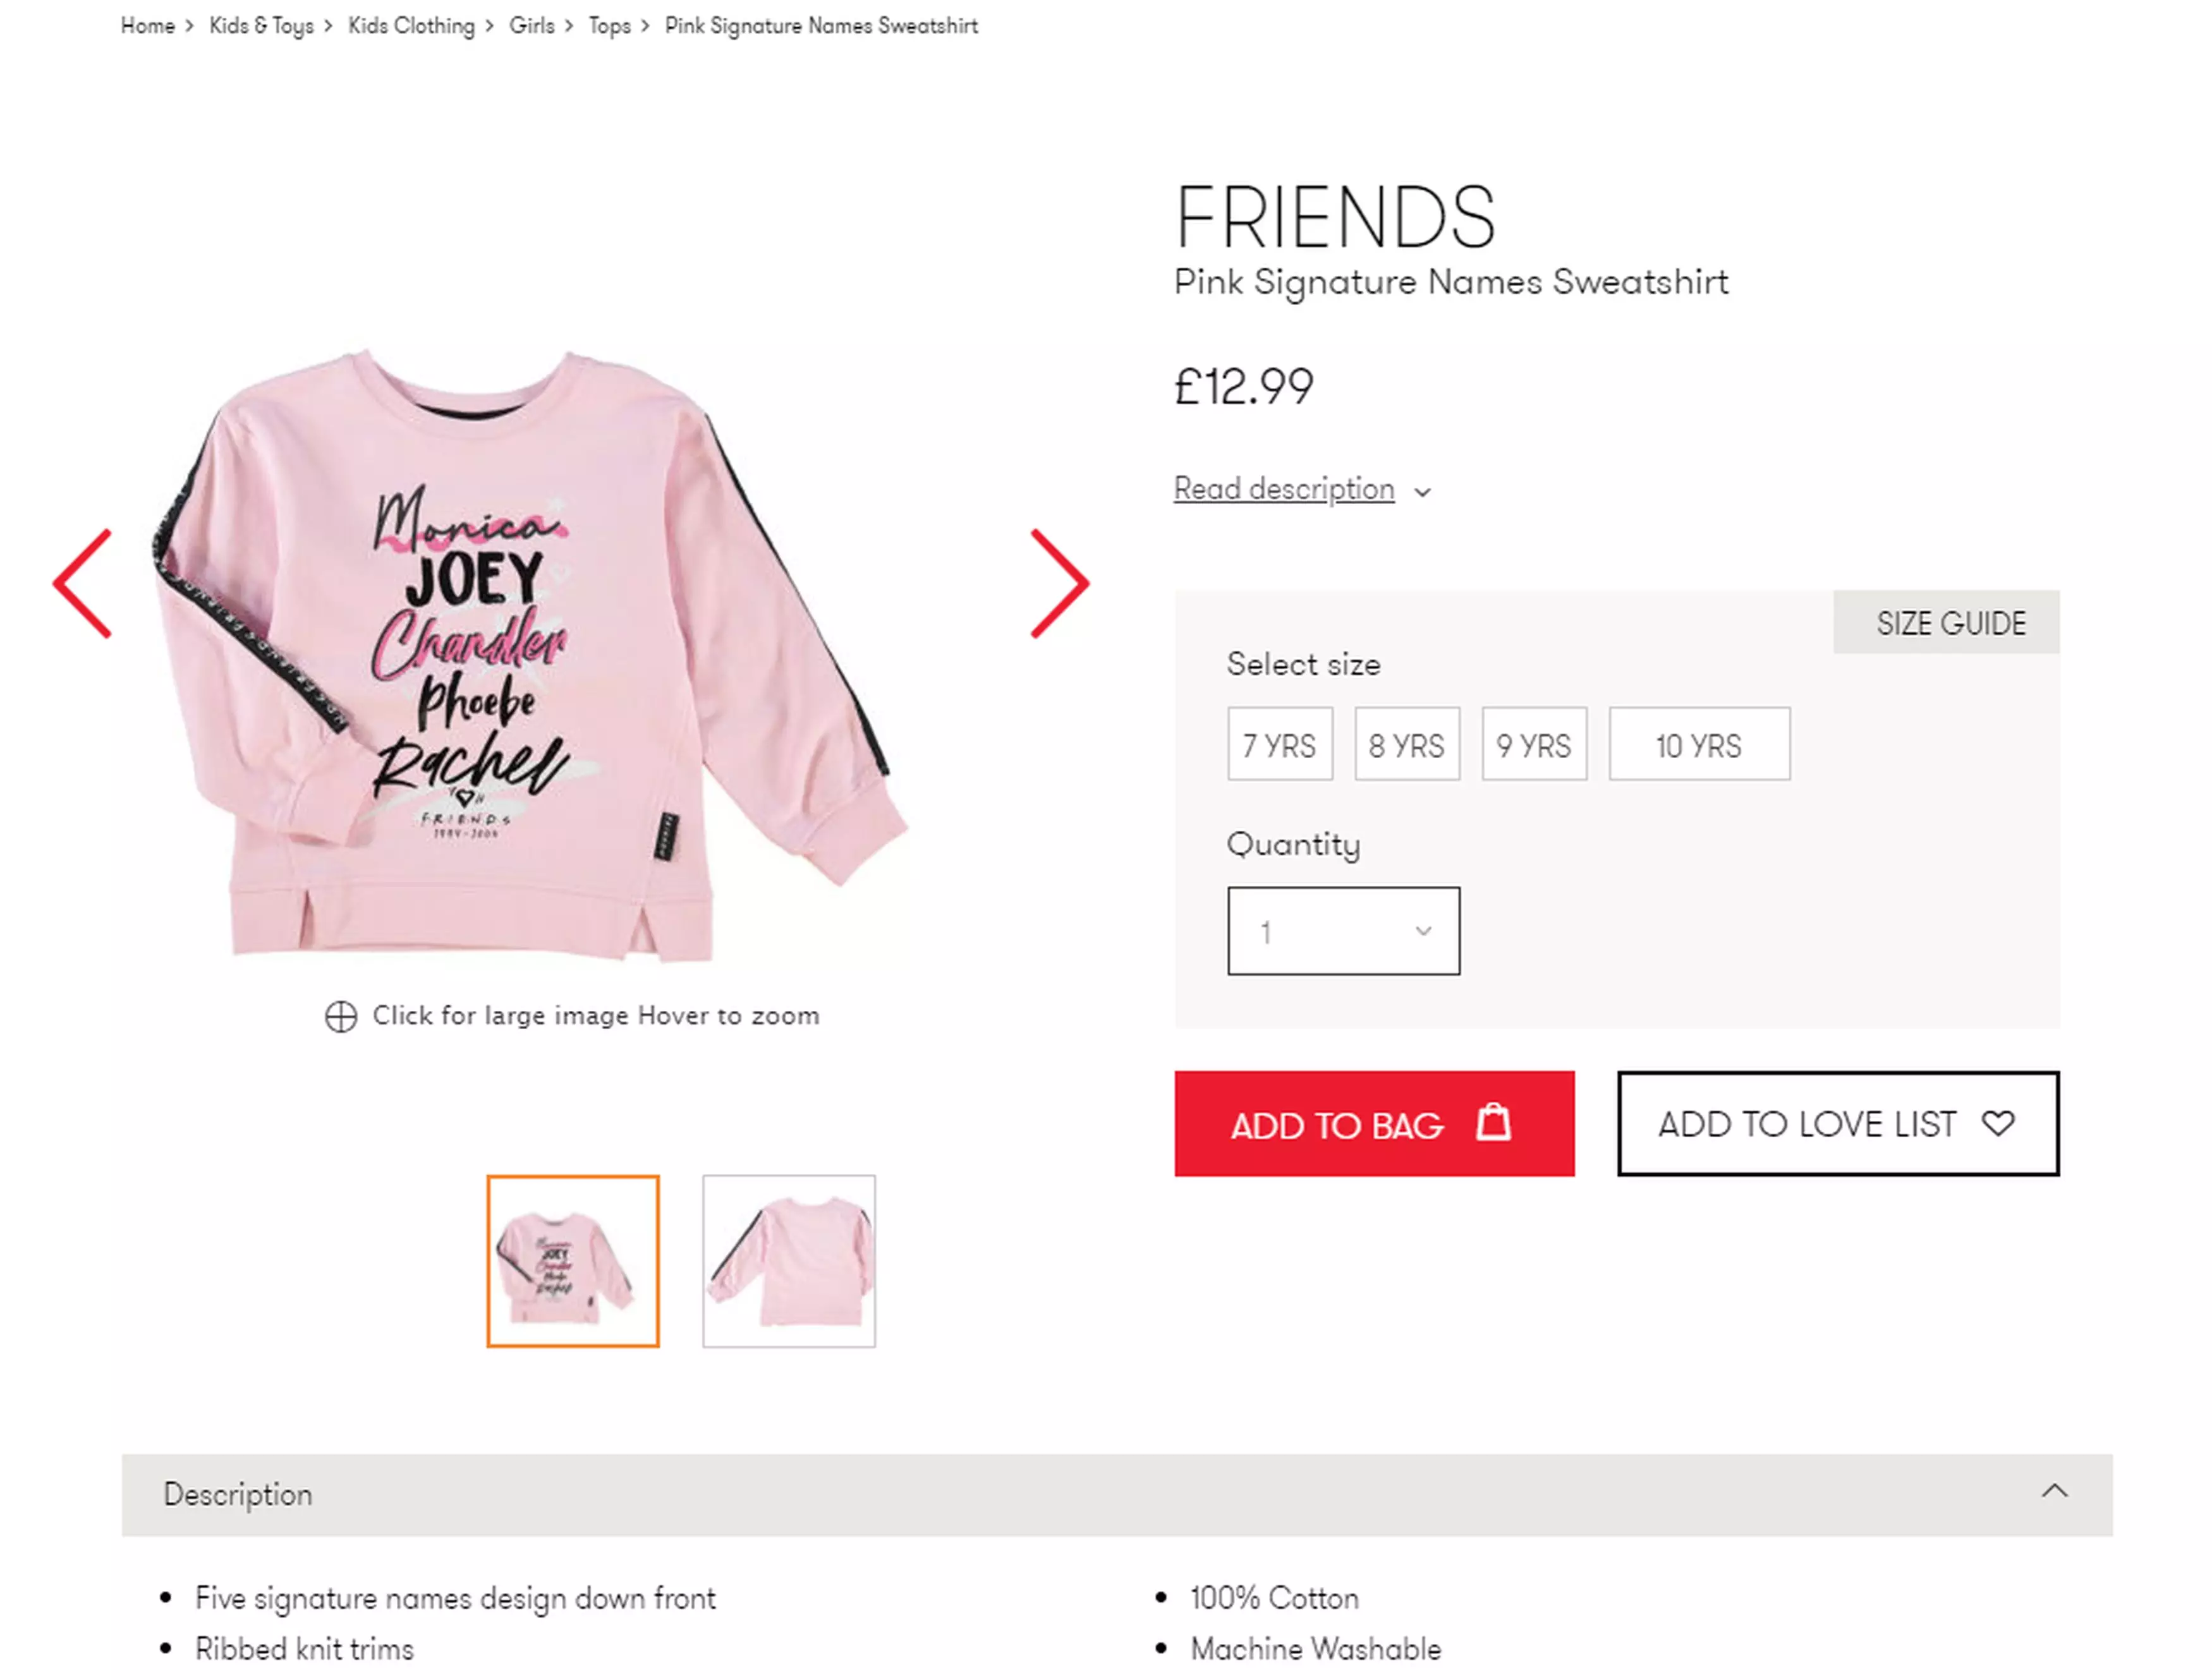 The jumper is available on the TK Maxx website (